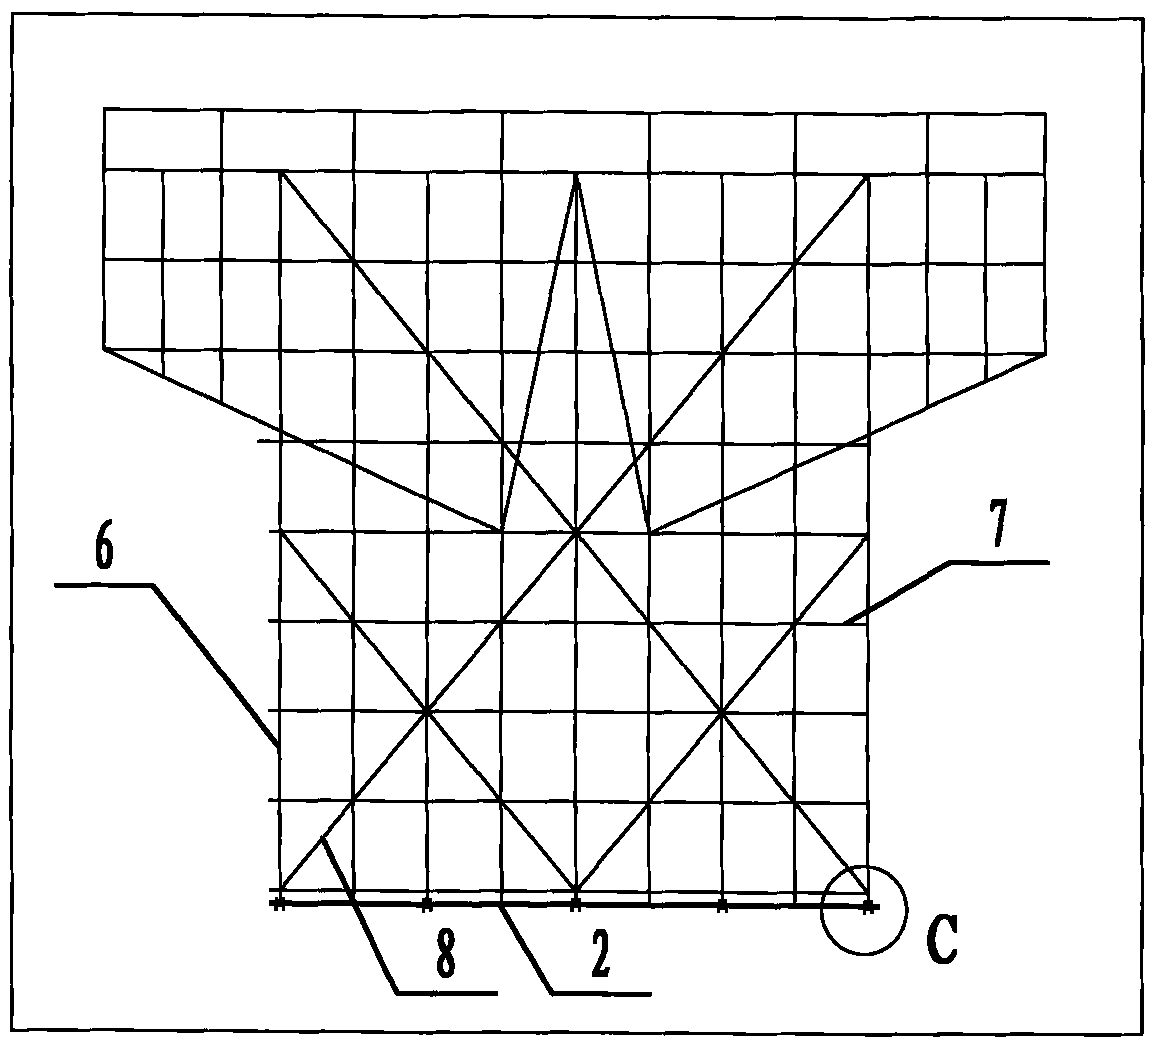 Building method of integral slip type scaffold used for steel grid construction